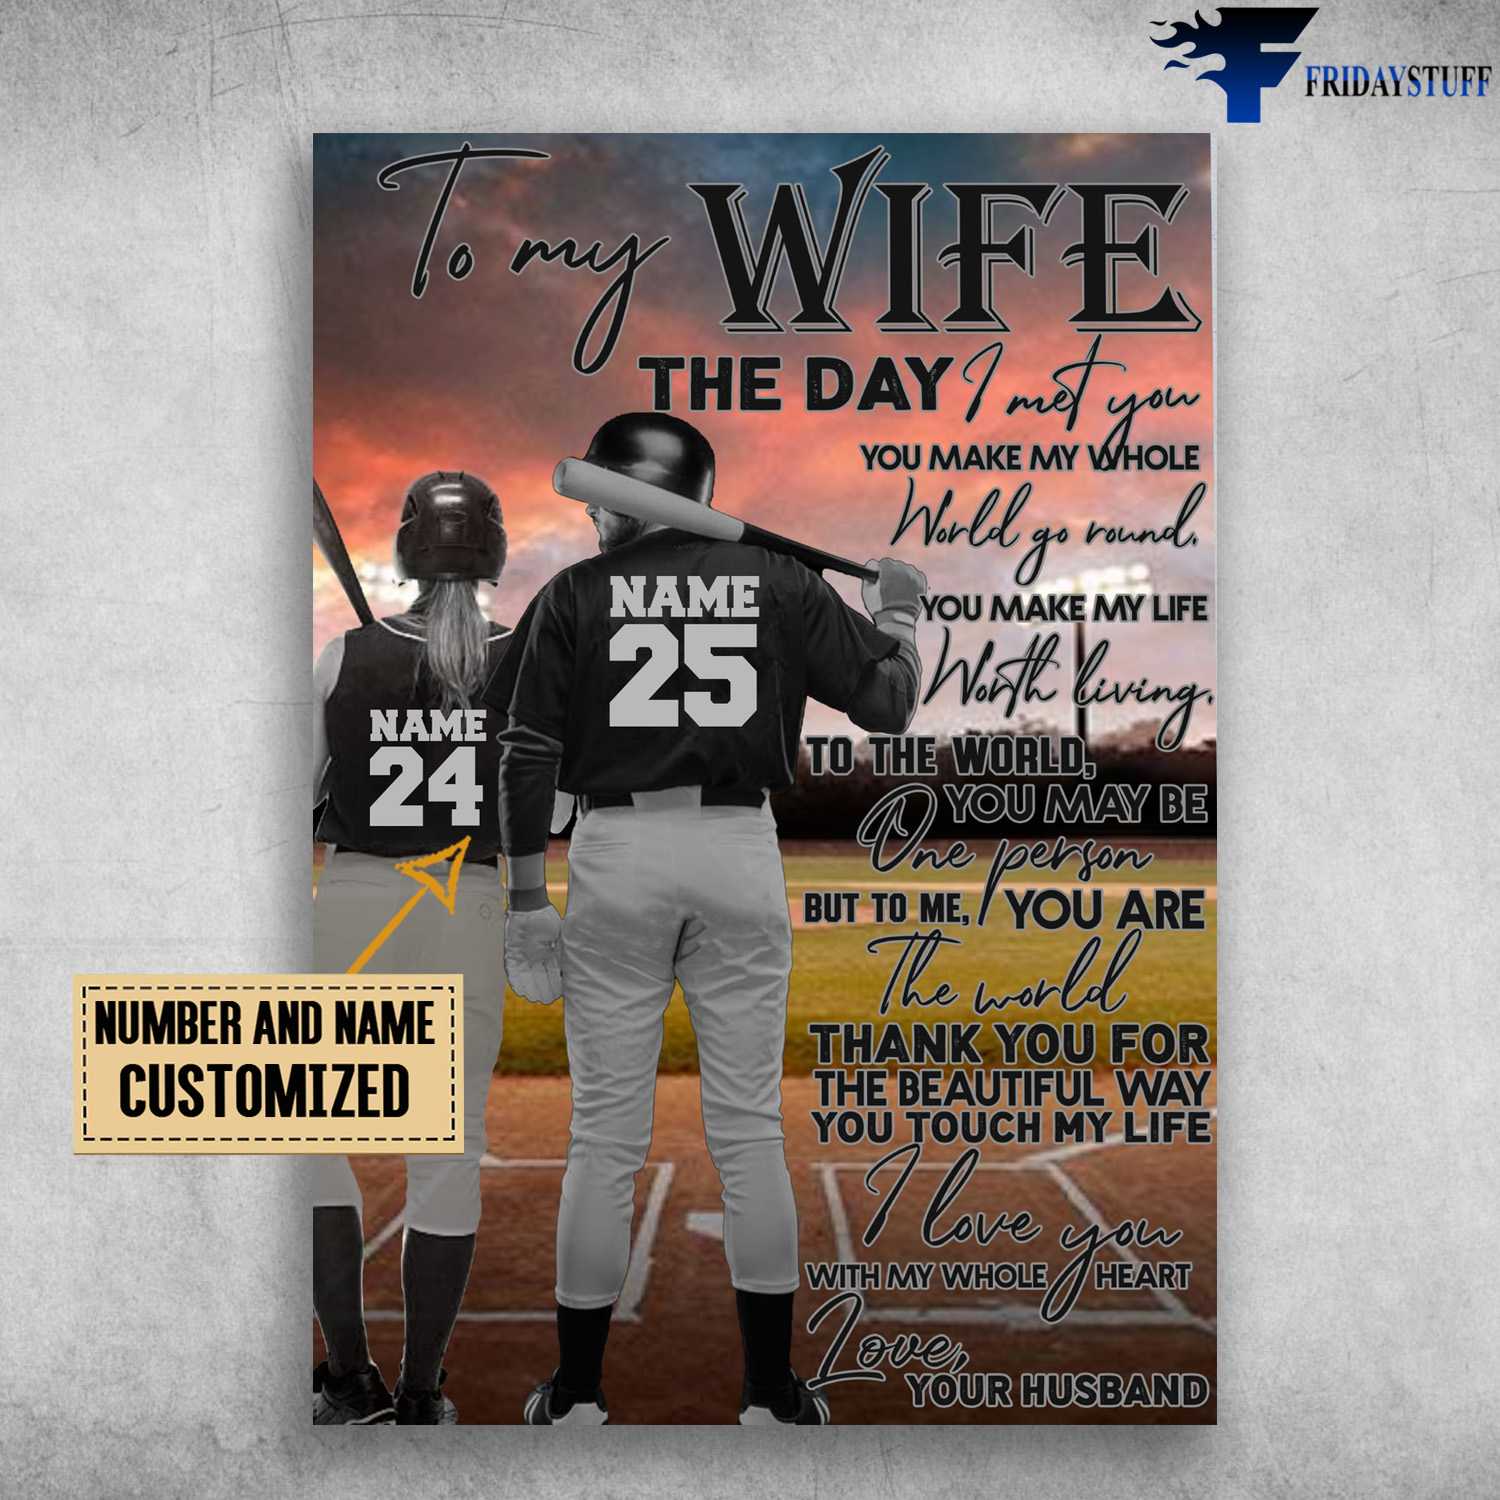 Baseball Poster, Husband And Wife, To My Wife, The Day I Met You, You Make My Whole World Go Round, You Make My Life, Worth Living, To The World, You May Be One PersonLiving, To The World, You May Be One Person